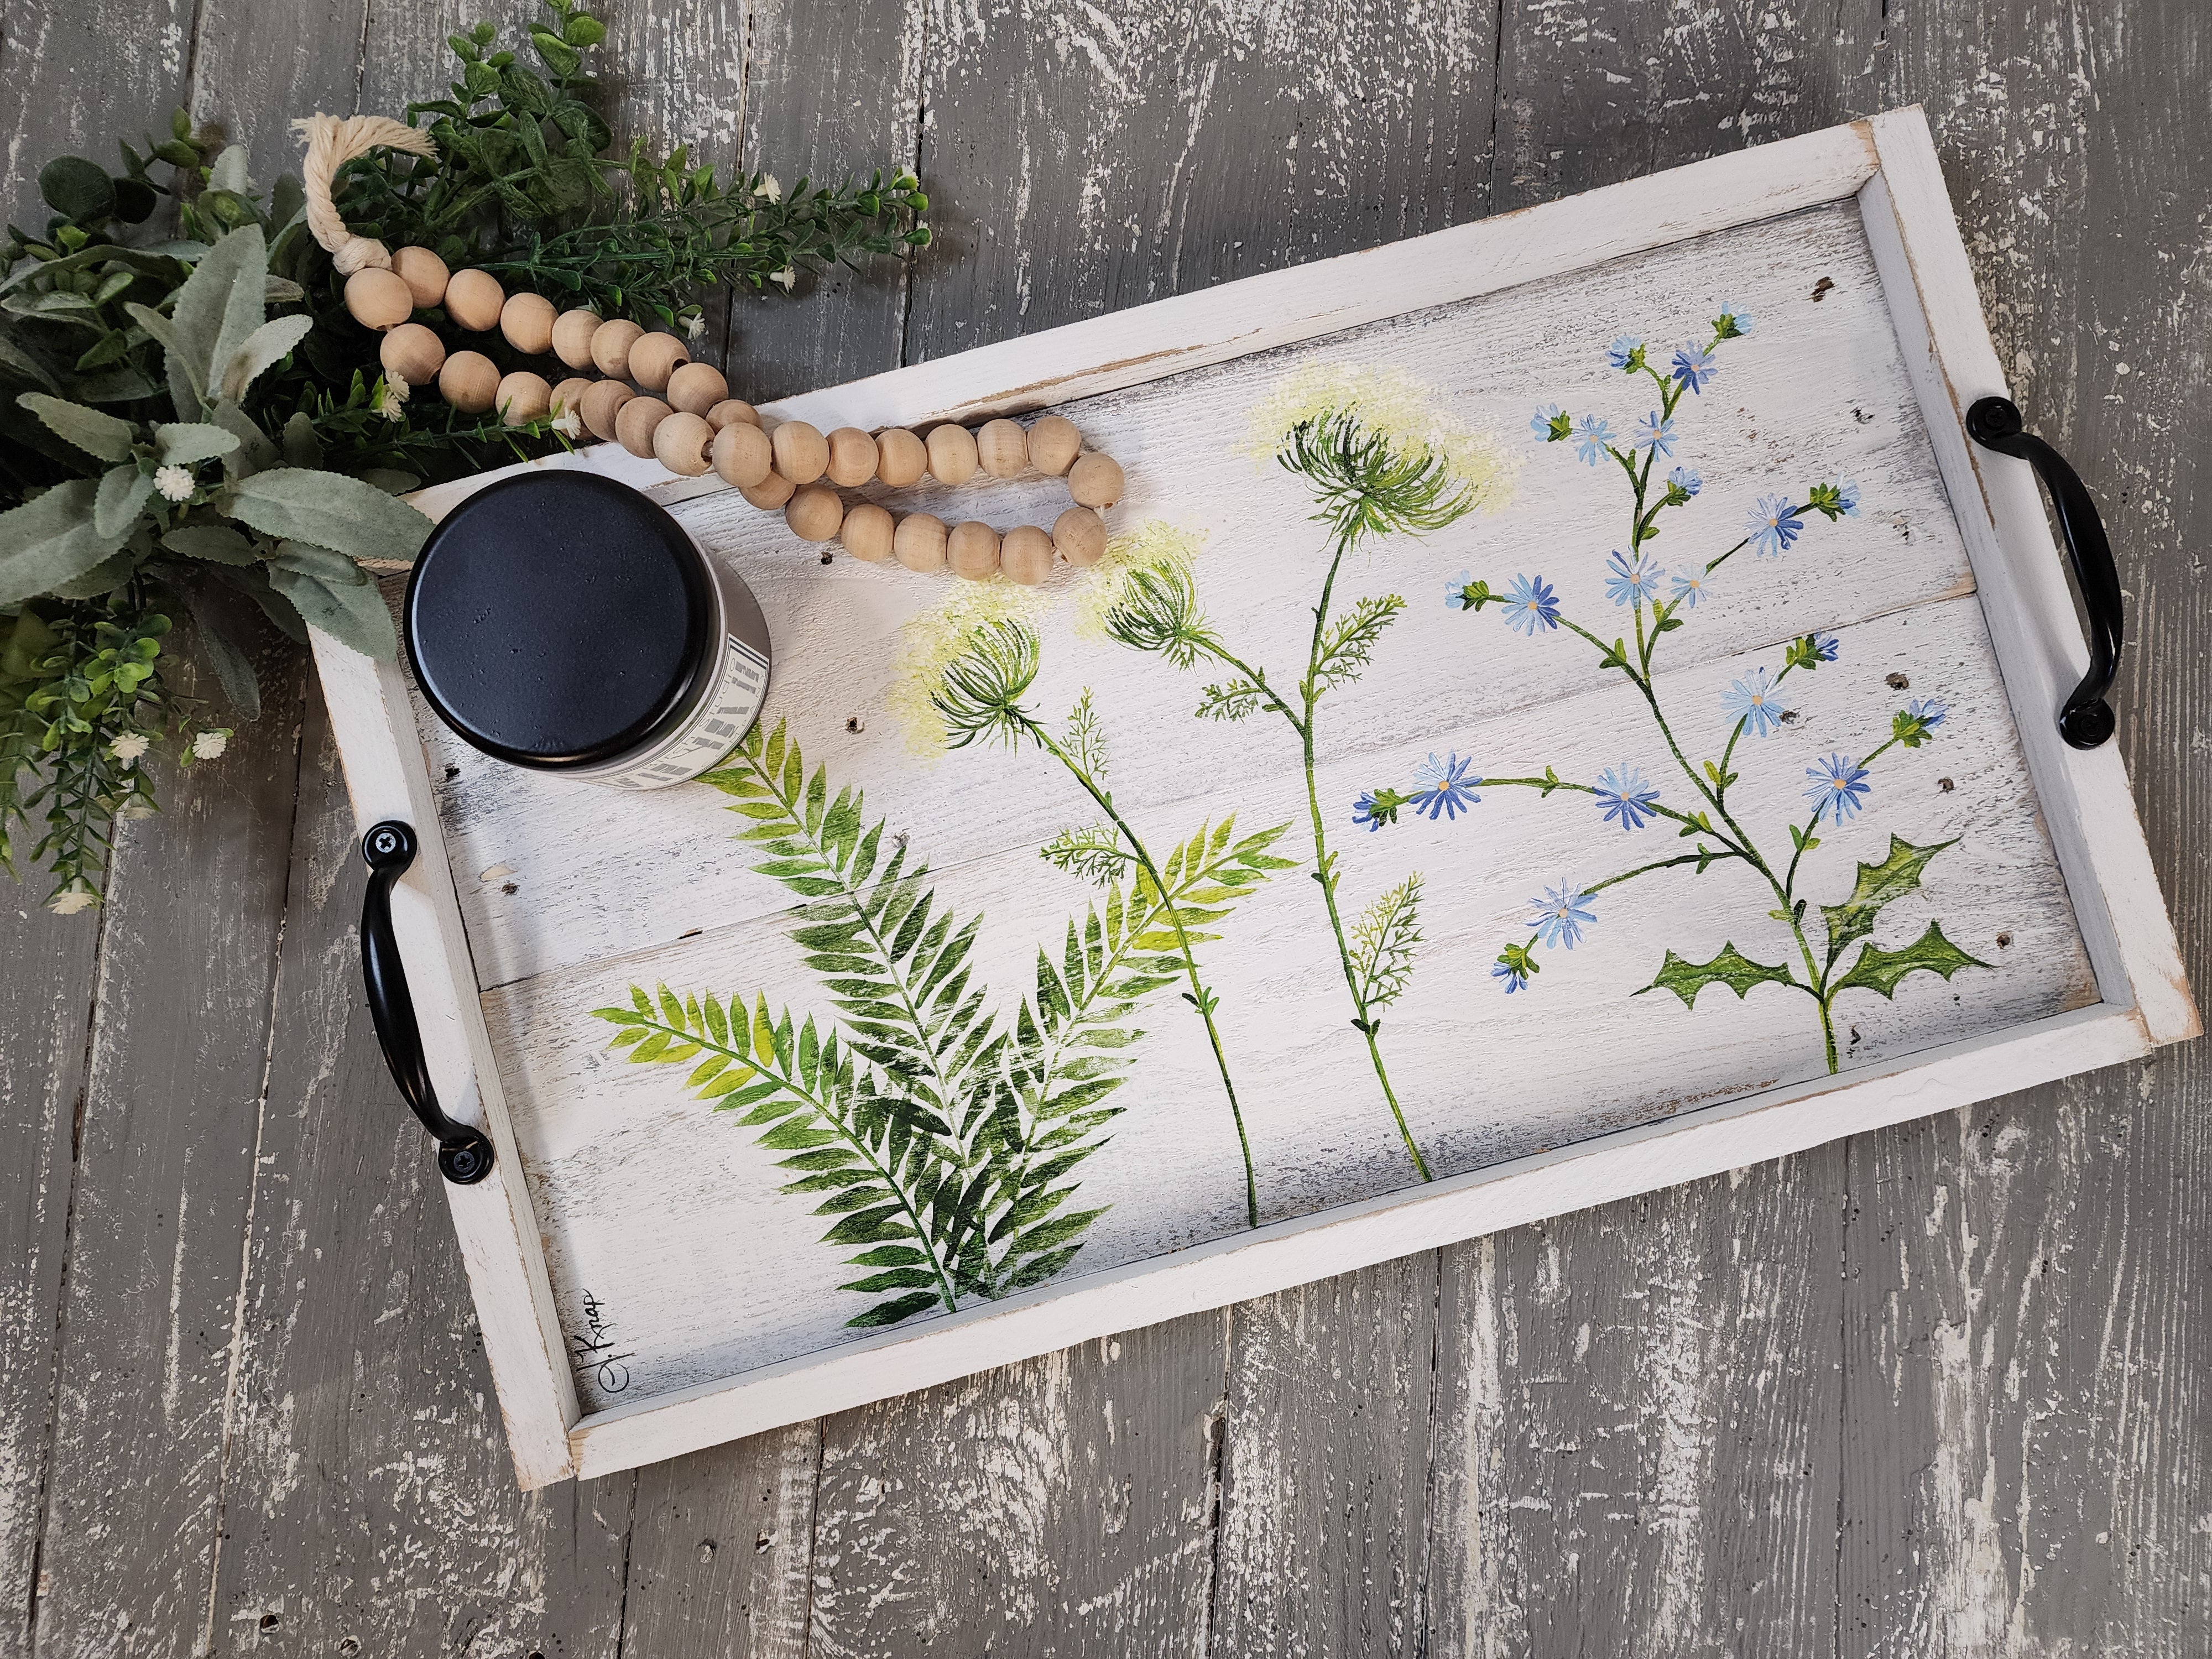 Wild flower hand painted Decorative tray on pallet wood, Rustic farmhouse decor, table tray with Spring flowers